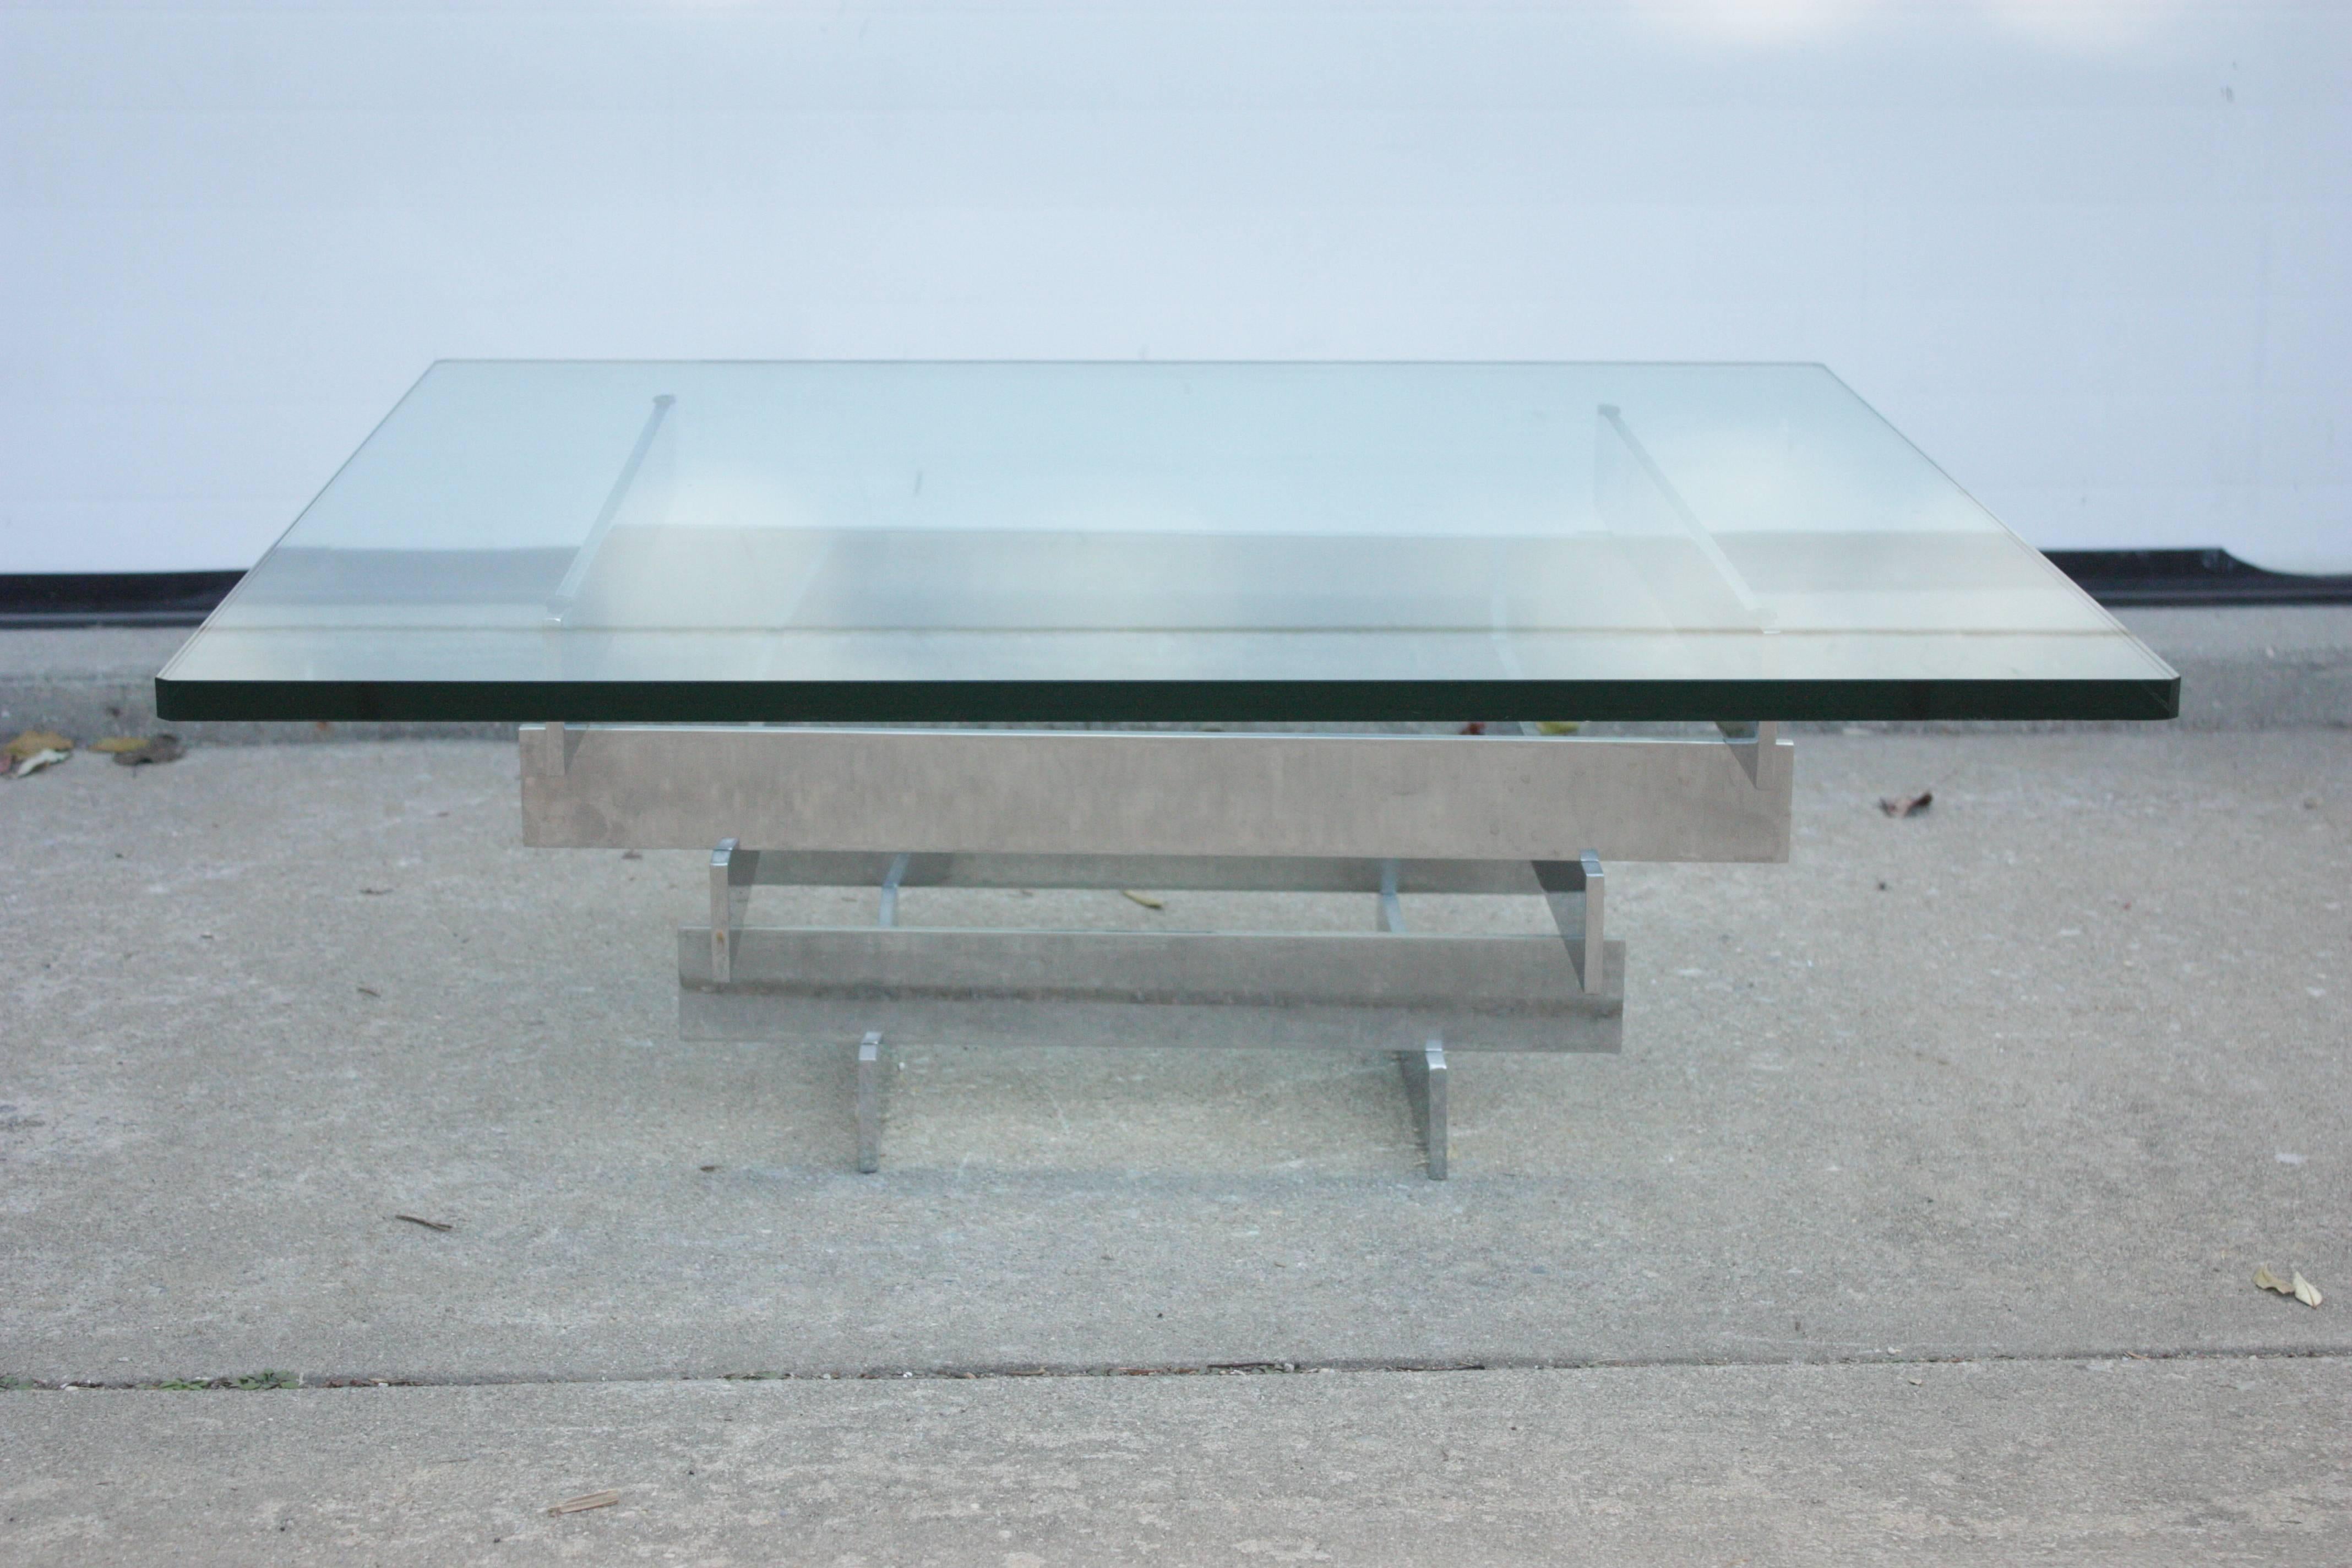 1970s midcentury chrome and glass stacked geometric beam coffee table.
Heavy, thick clear square glass top with fillet corners. Optical as well as dimensional presence.